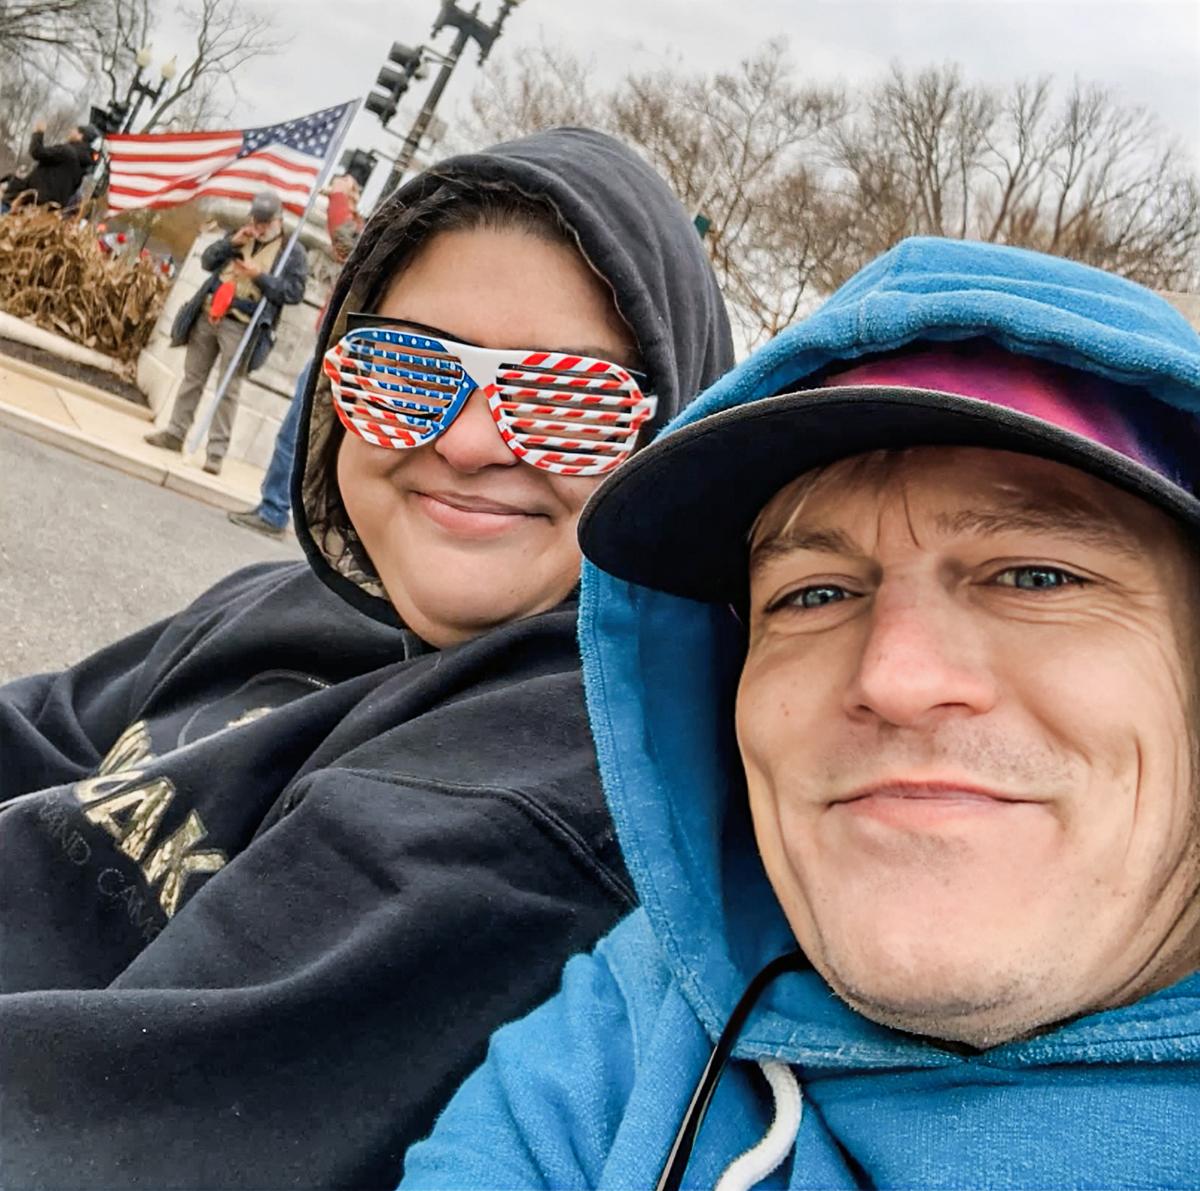  Rosanne Boyland and friend Justin Winchell at the U.S. Capitol in Washington on Jan. 6, 2021. (Courtesy of the Boyland Family)